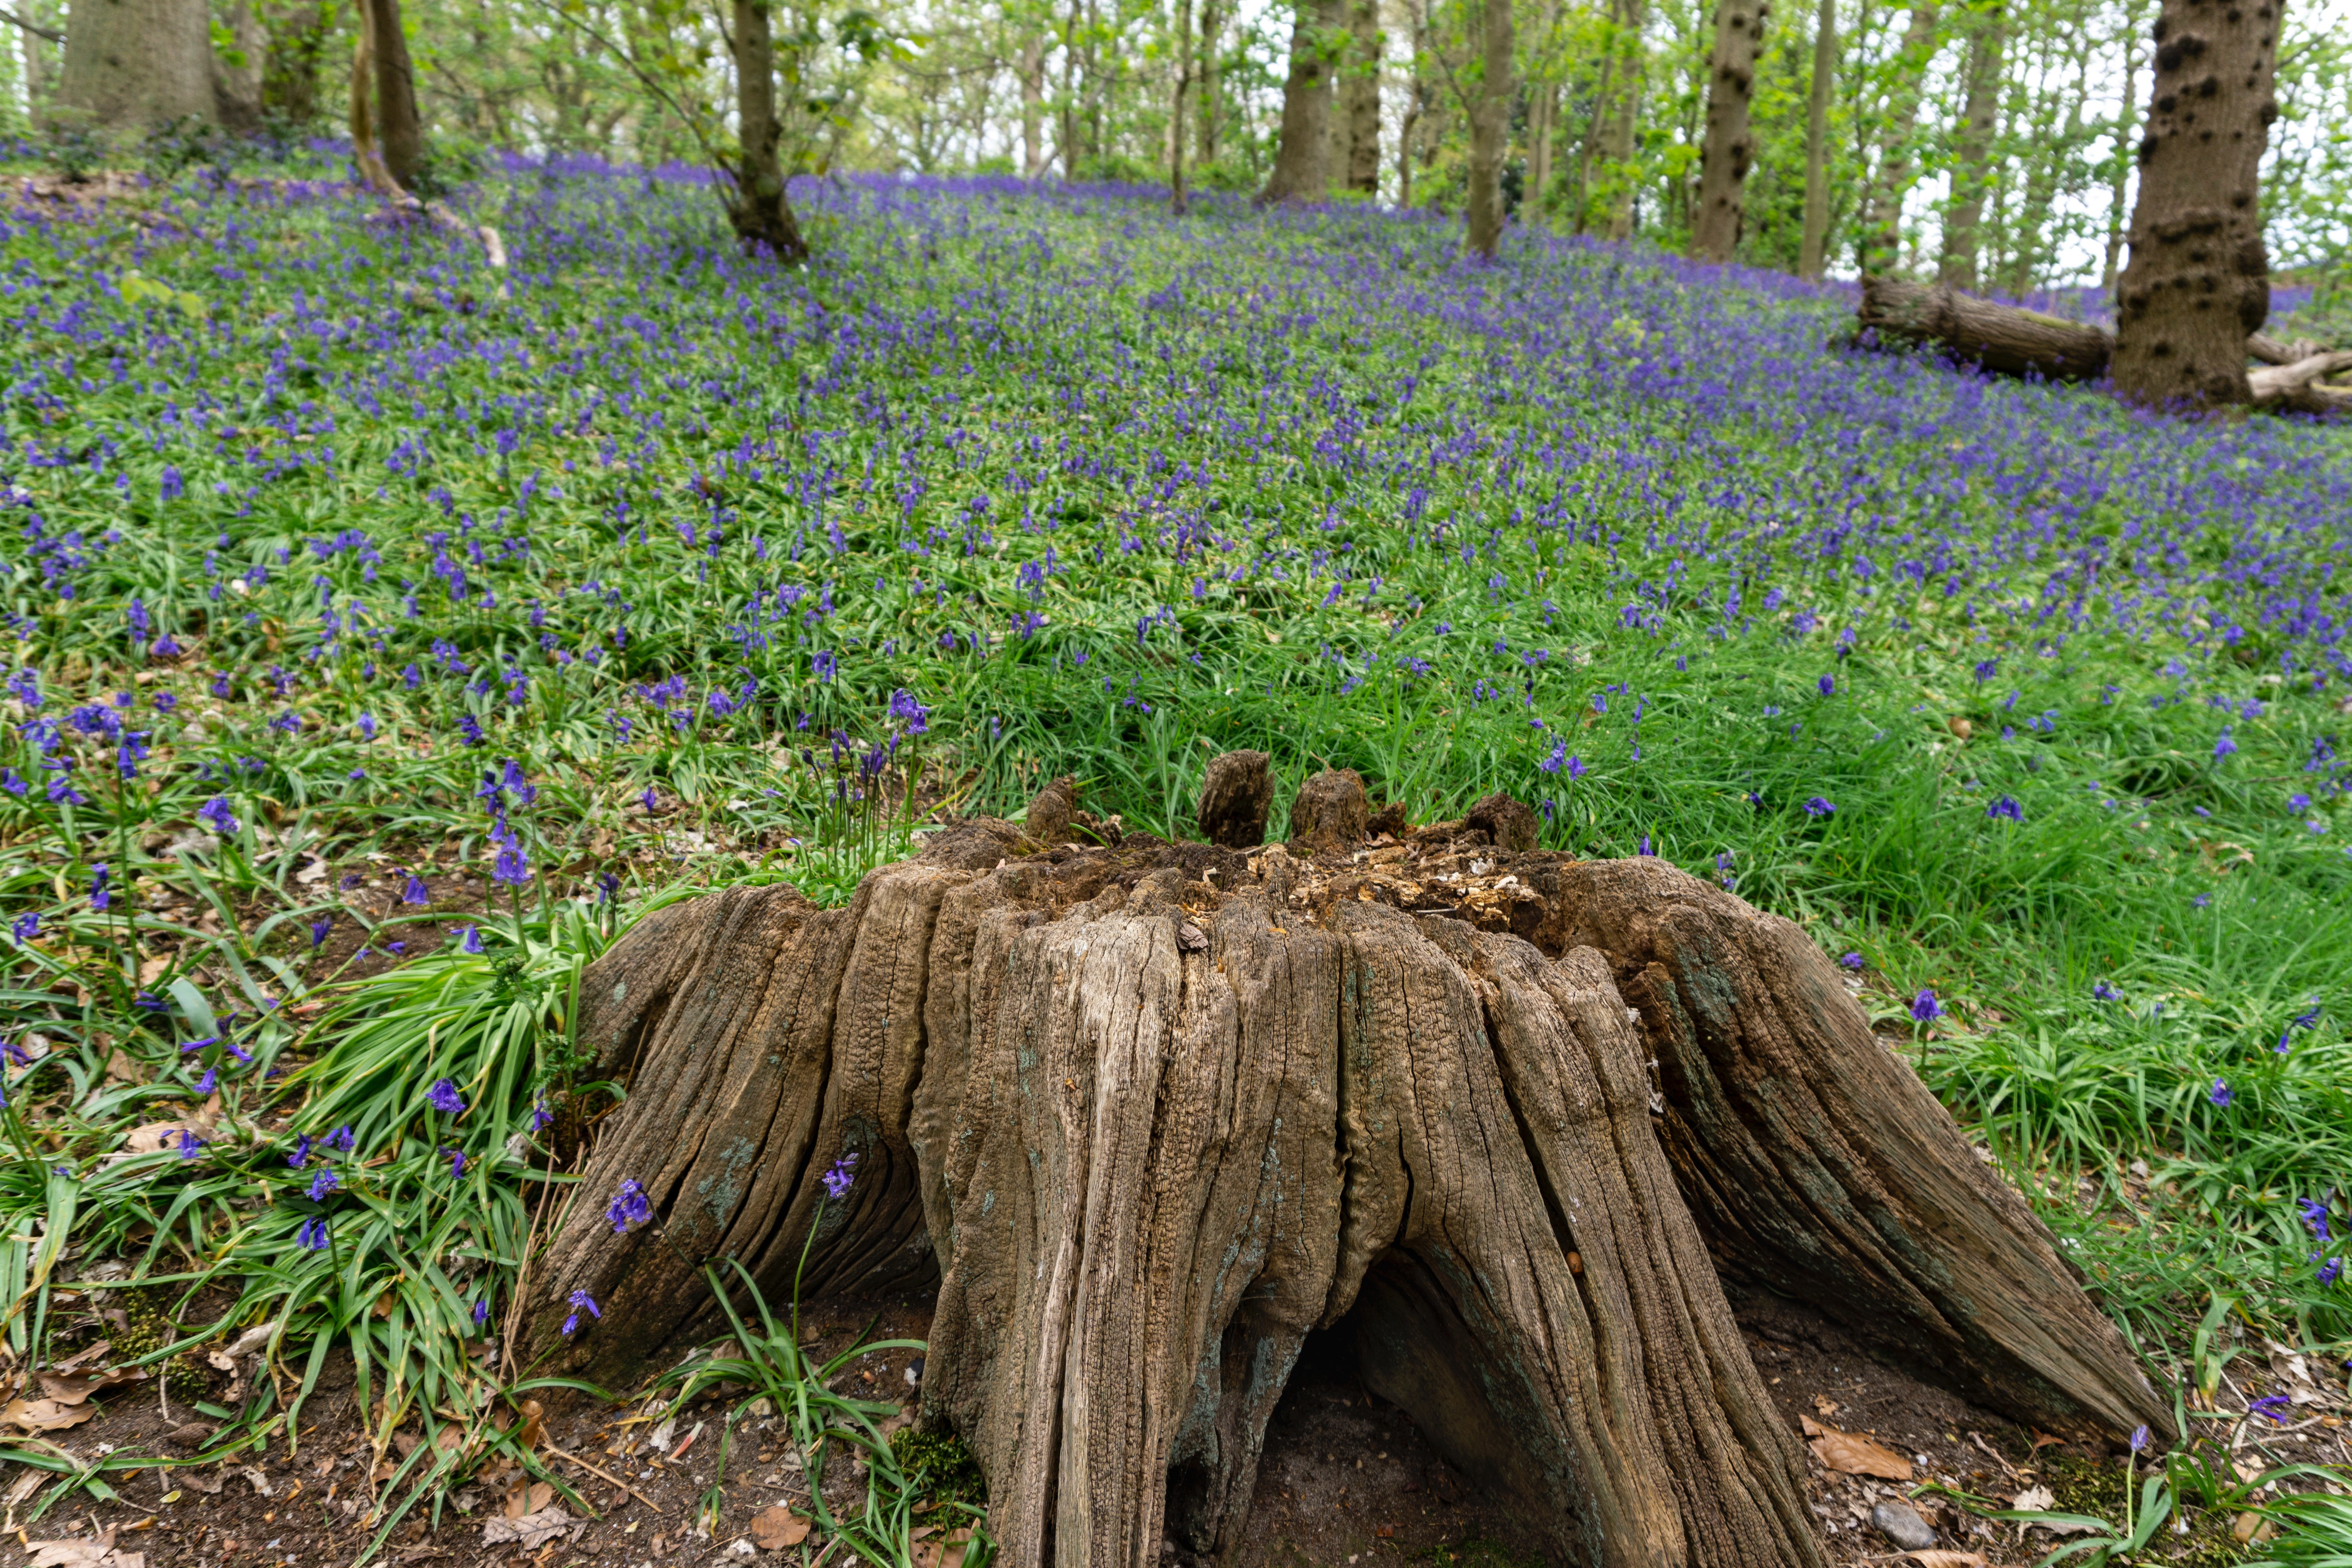 An old tree stump in a small field